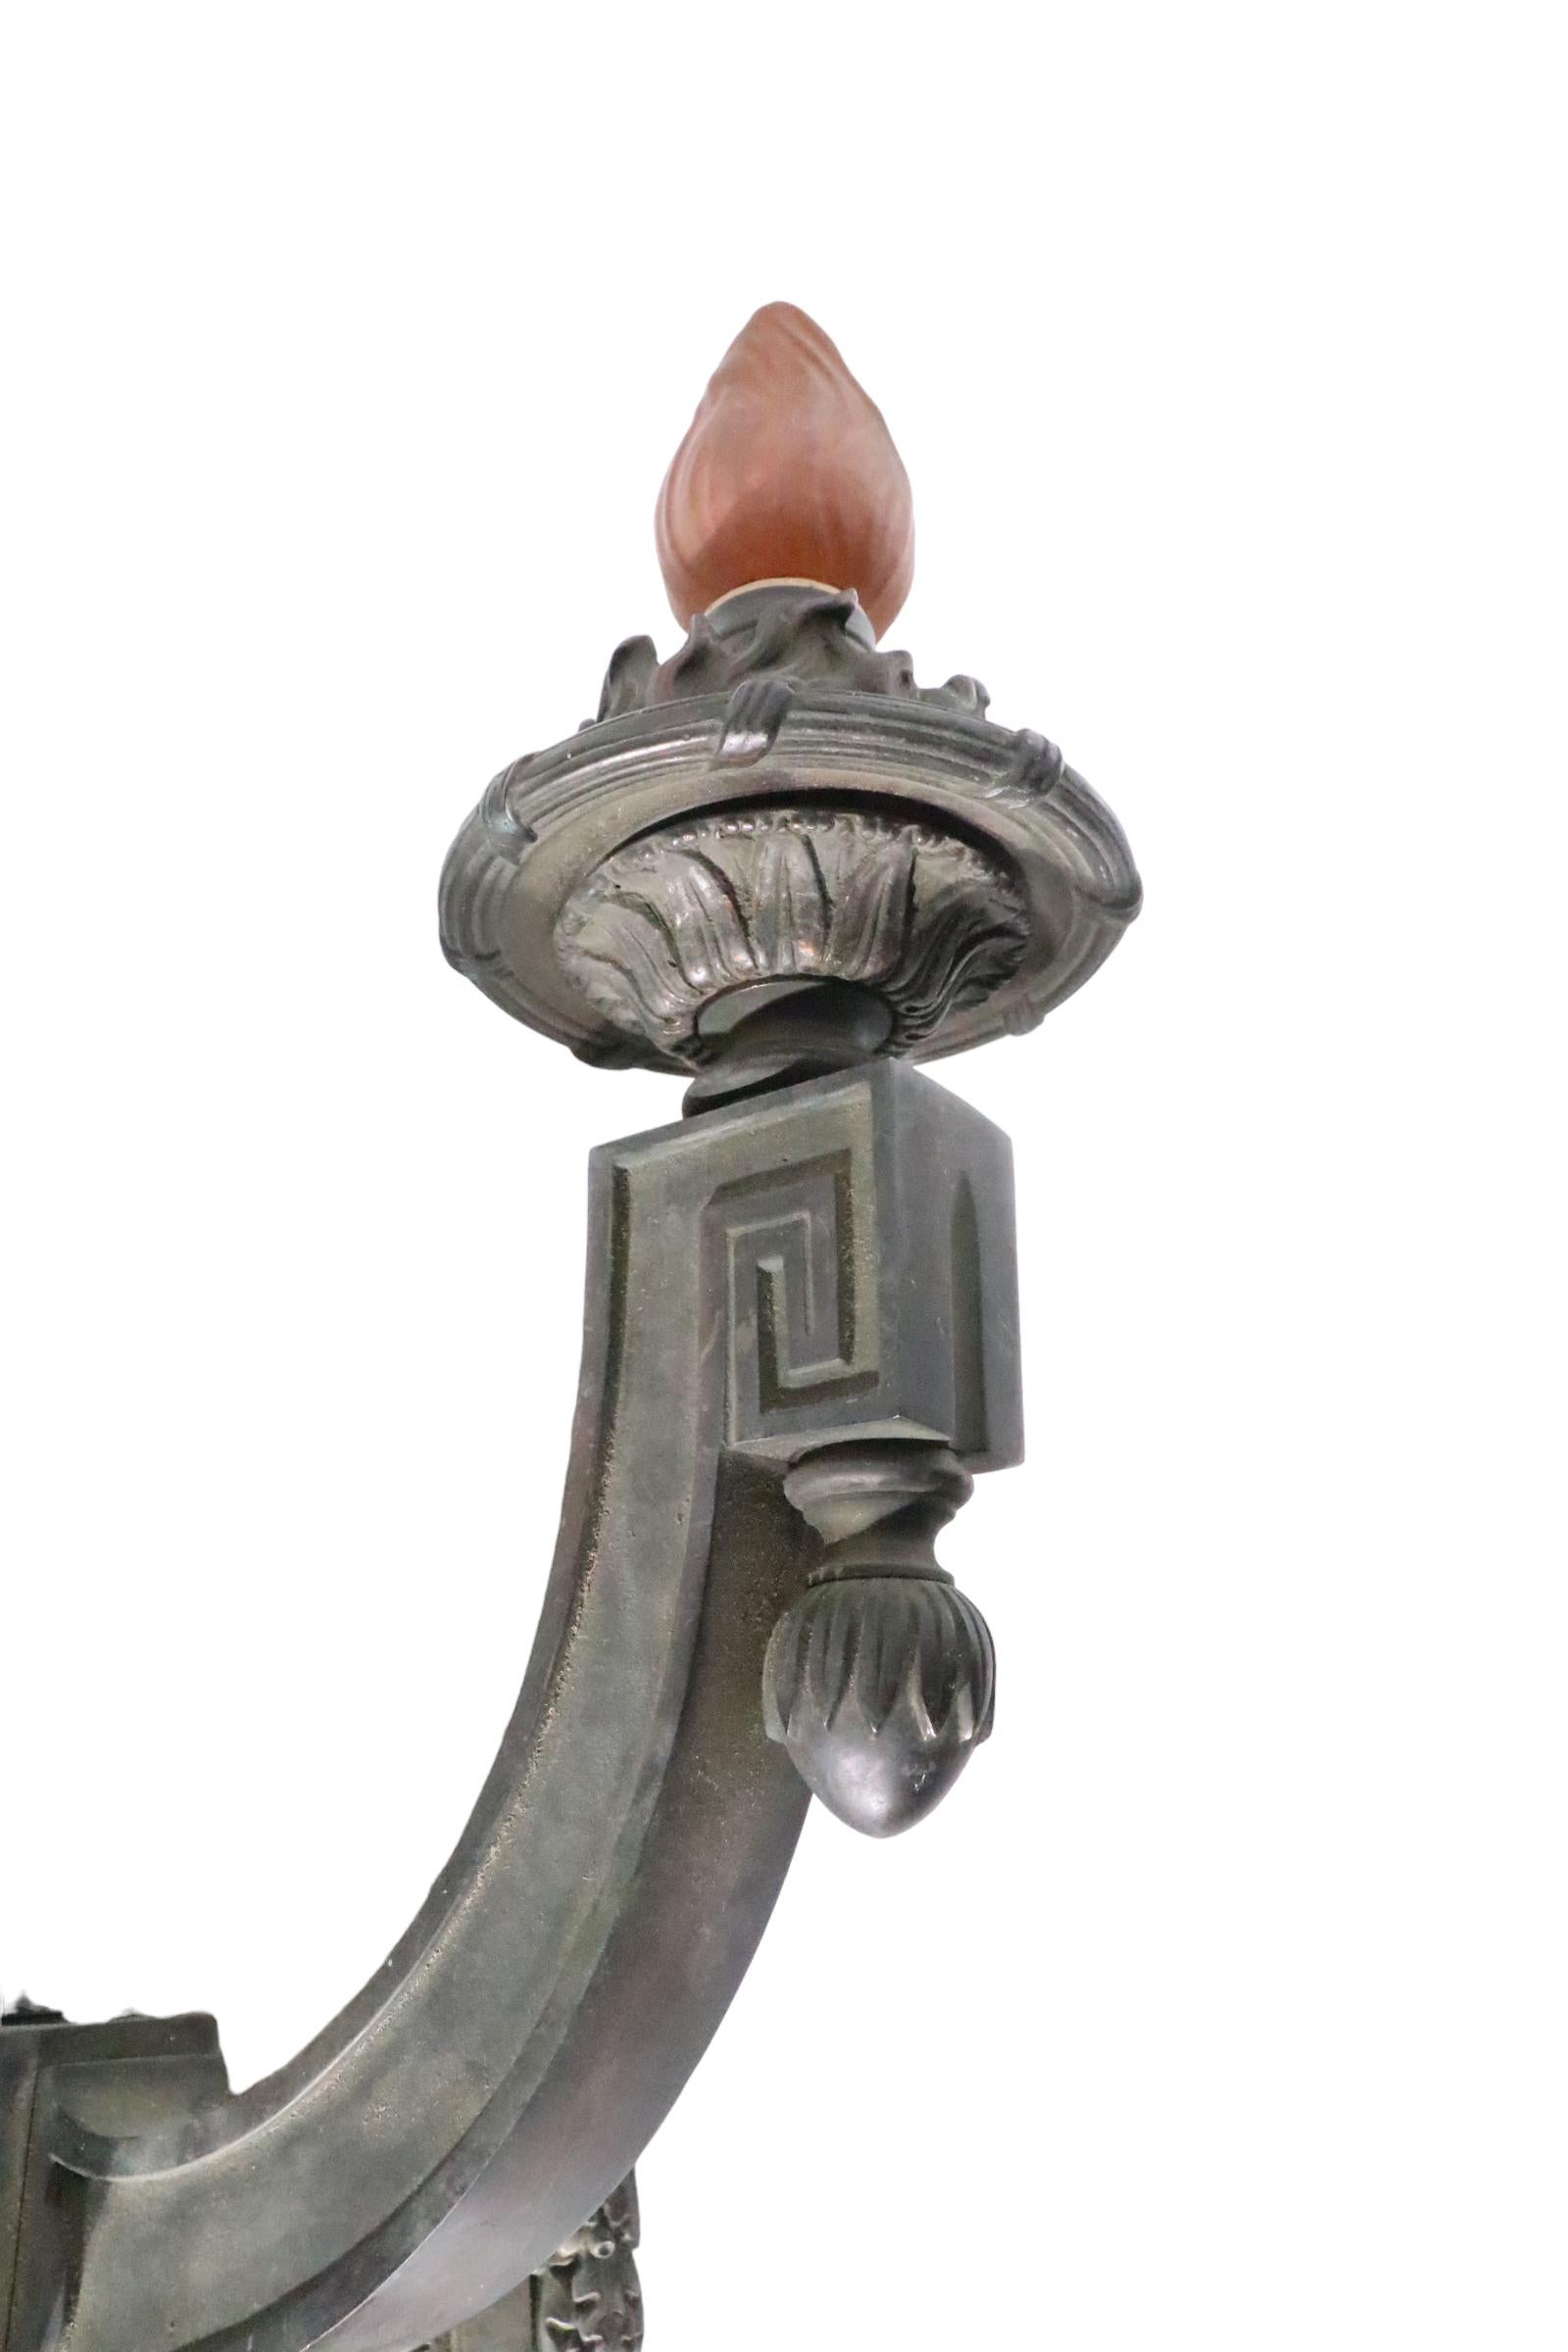 Spectacular cast brass, or bronze, three arm wall appliqué, probably from a bank, public building, or other commercial building. The sconce is in exceptional aged Verdigris finish, it is newly professionally rewired and is ready to install. Executed